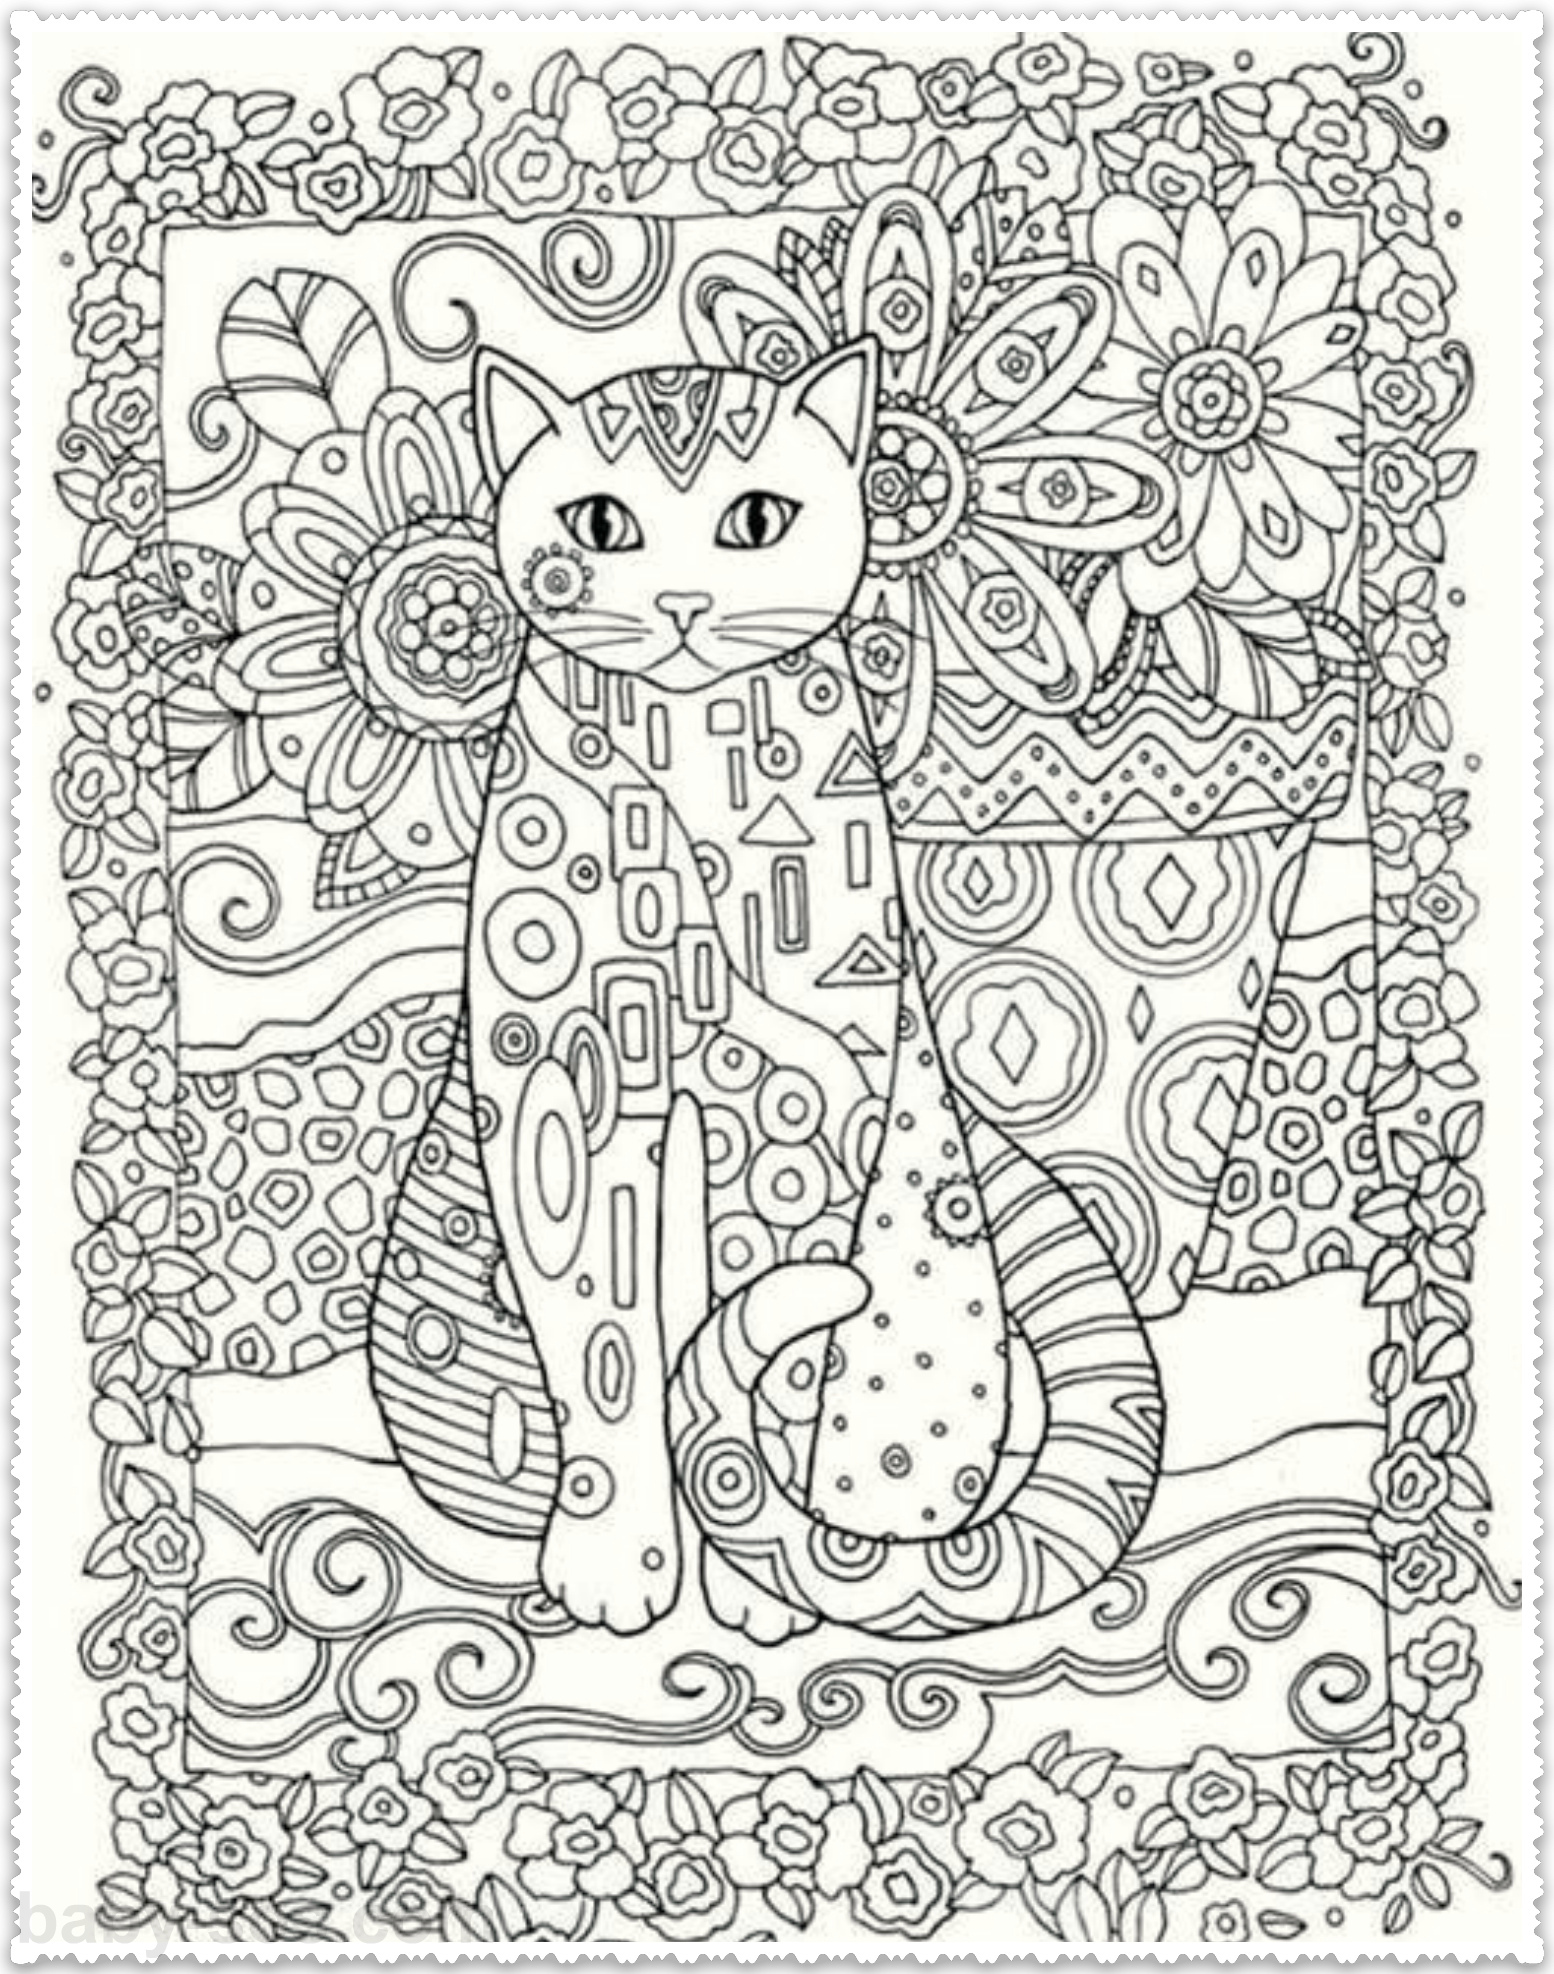 cats (Coloring for adults)